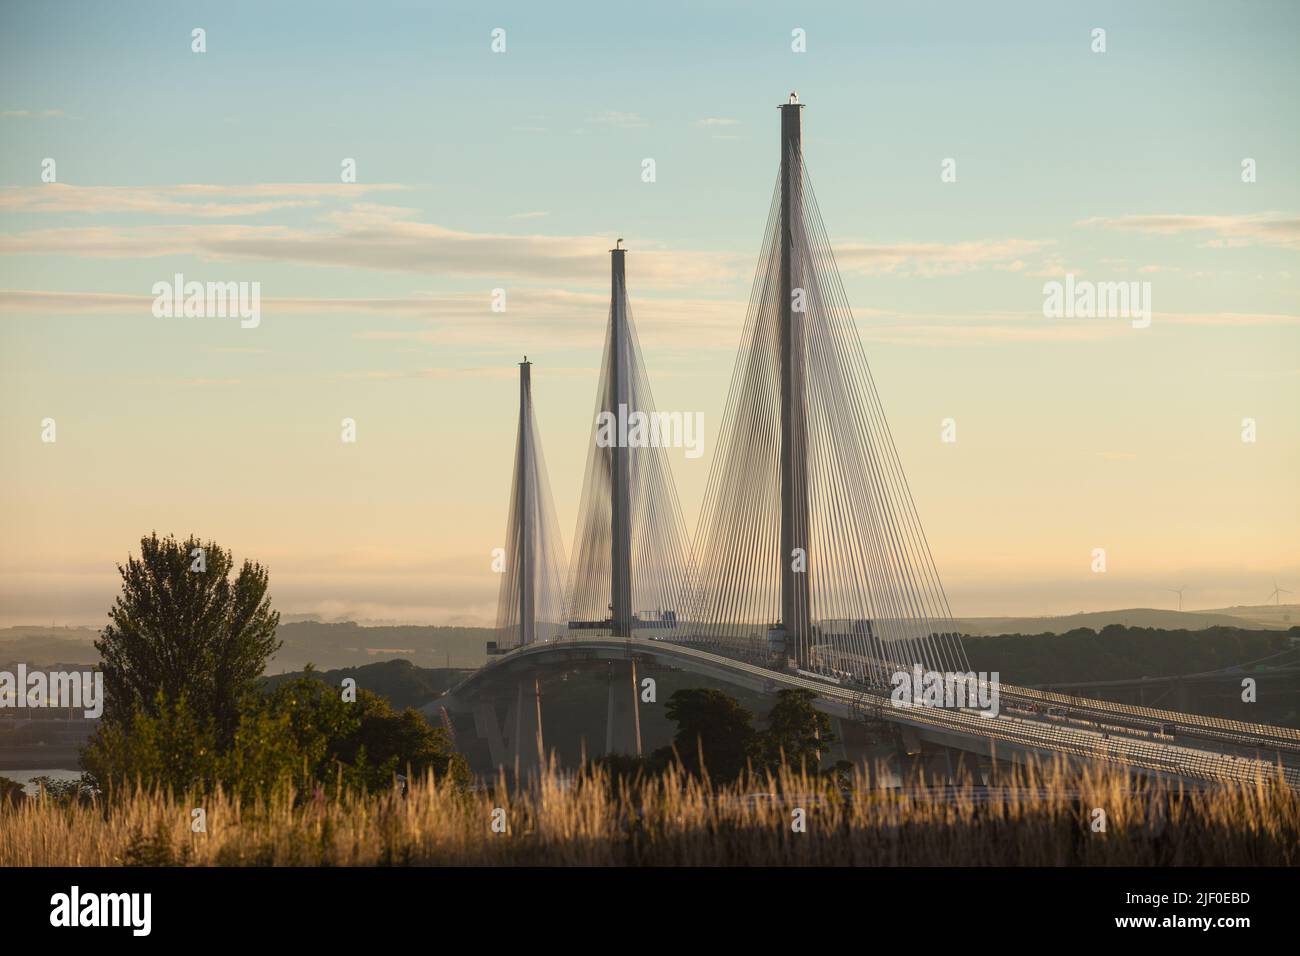 The Queensferry Crossing the new bridge over the Firth of Forth at sunrise, Edinburgh Scotland. Stock Photo